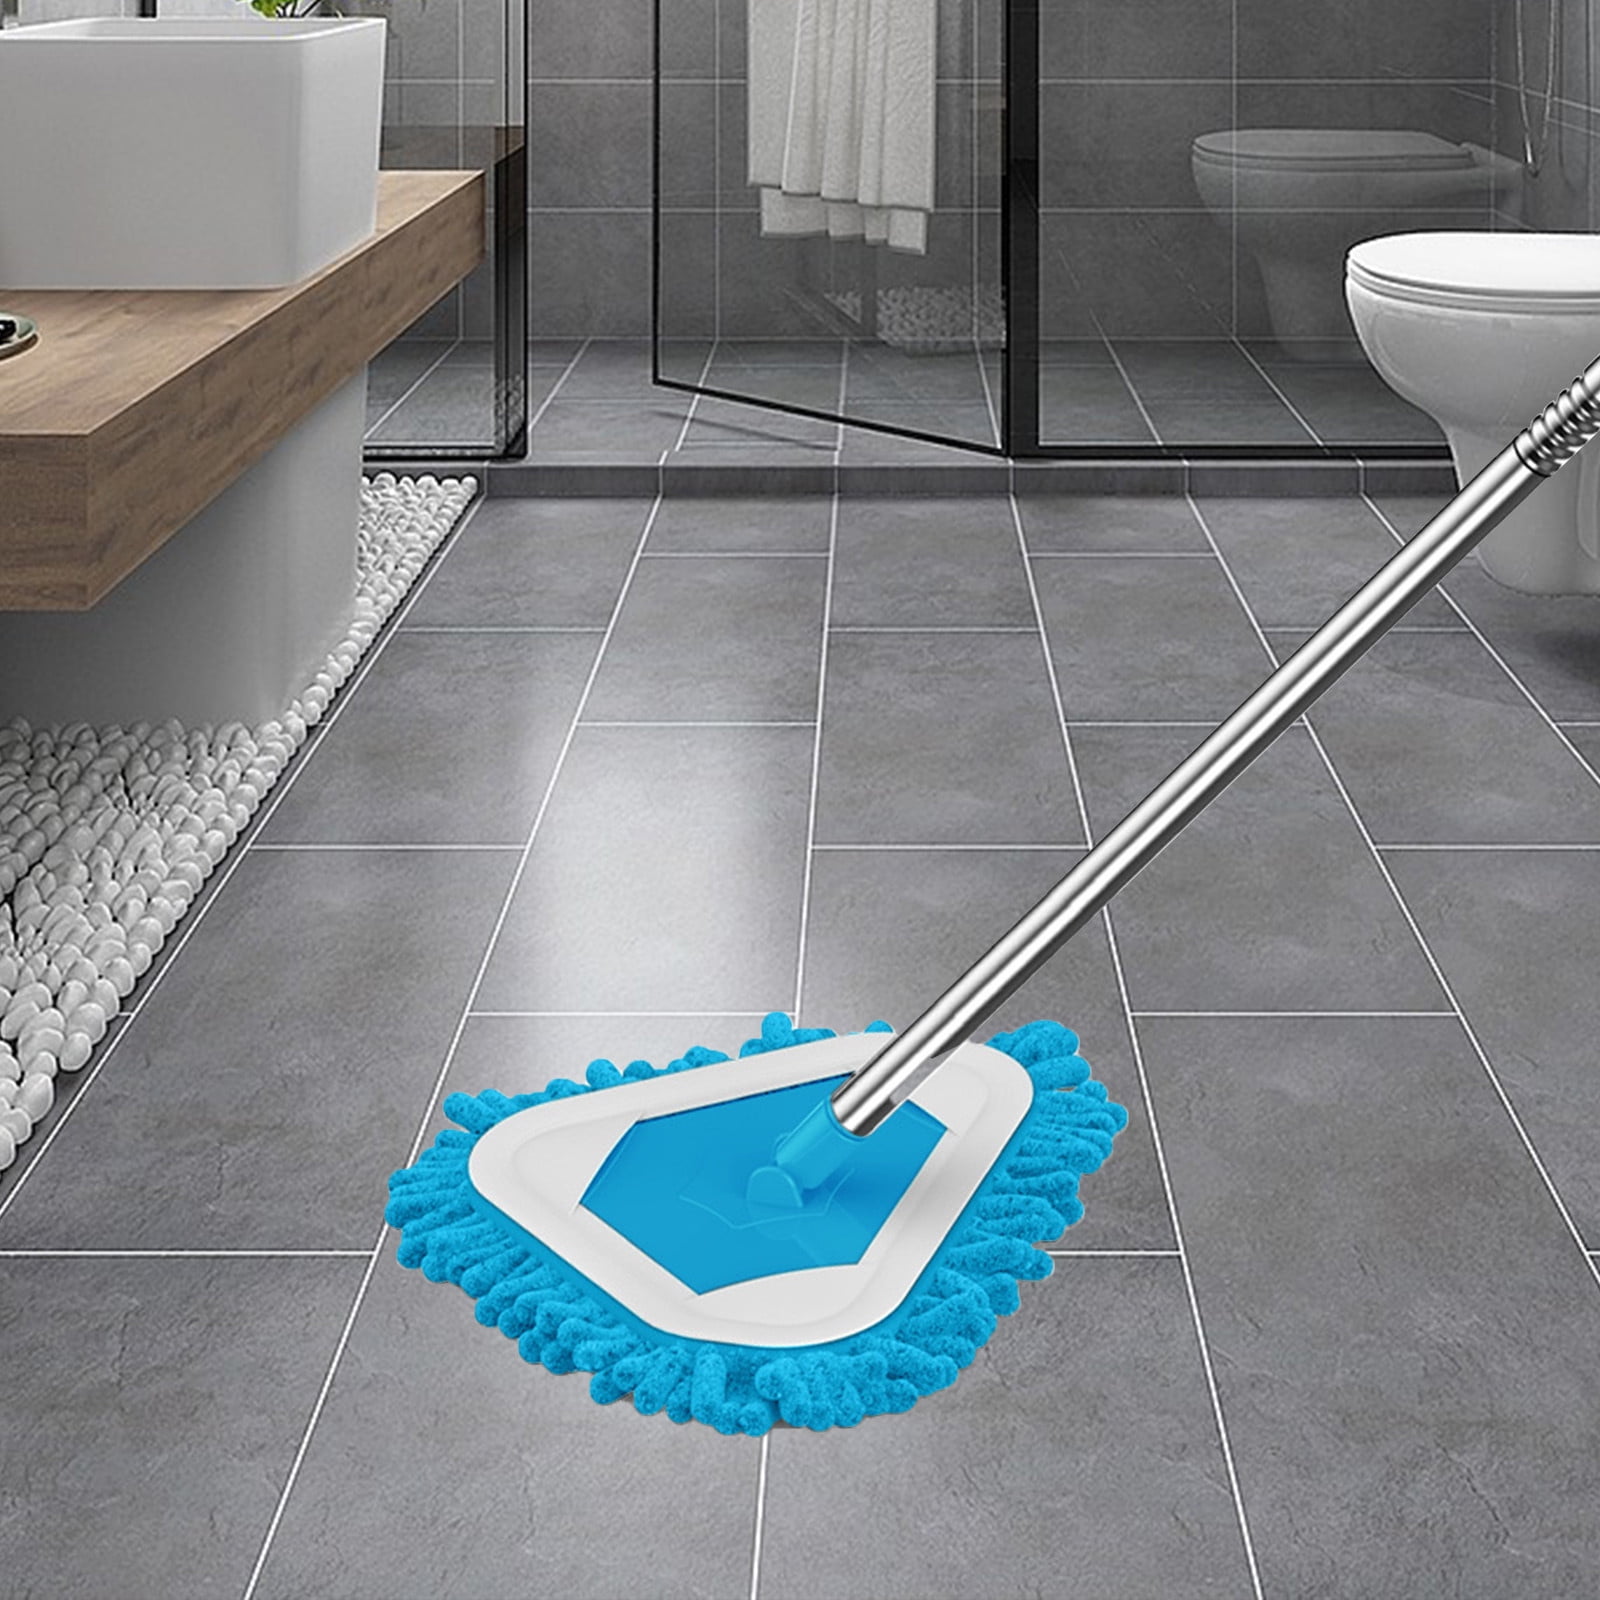 Wall Cleaner with Long Handle - 75in Ceiling Mop Wall and Baseboard  Cleaning Tools with Extension Pole, Triangle Rotatable Adjustable Wall  Duster Scrubber for Painted Walls Window(4 Replacement Pads) 75in Wall Mop